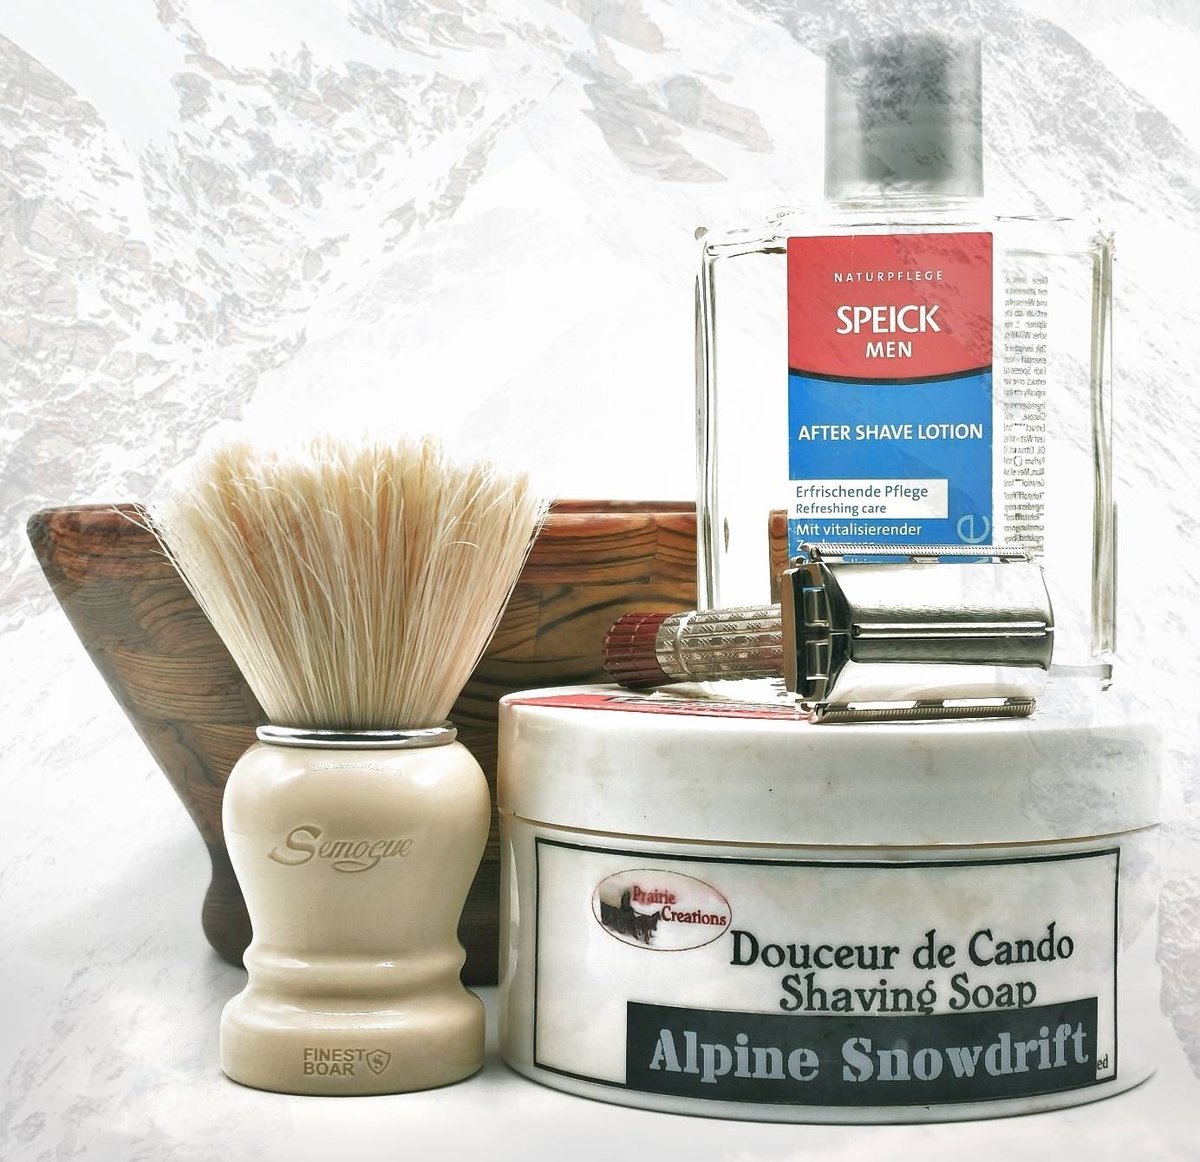 Today's shave gear: Razor: #Gillette Red Tip Brush: Semogue 2021 Spanish Shavers Boar Limited Edition Shave Soap: Prairie Creations DdC Alpine Snowdrift Aftershave: Speick ow.ly/U8pM50RGfRj #shaveOfTheDay #shaveGear #mensGrooming #wetShaving #sotd #vintageShaveGear